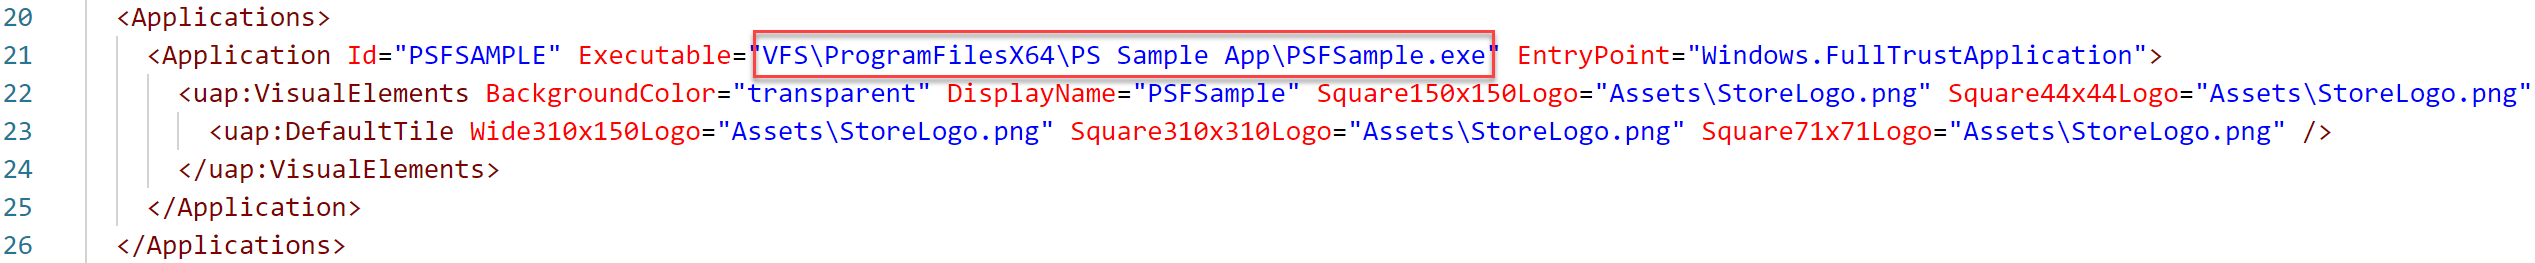 Image showing the location of the executable within the *AppxManifest.xml* file.